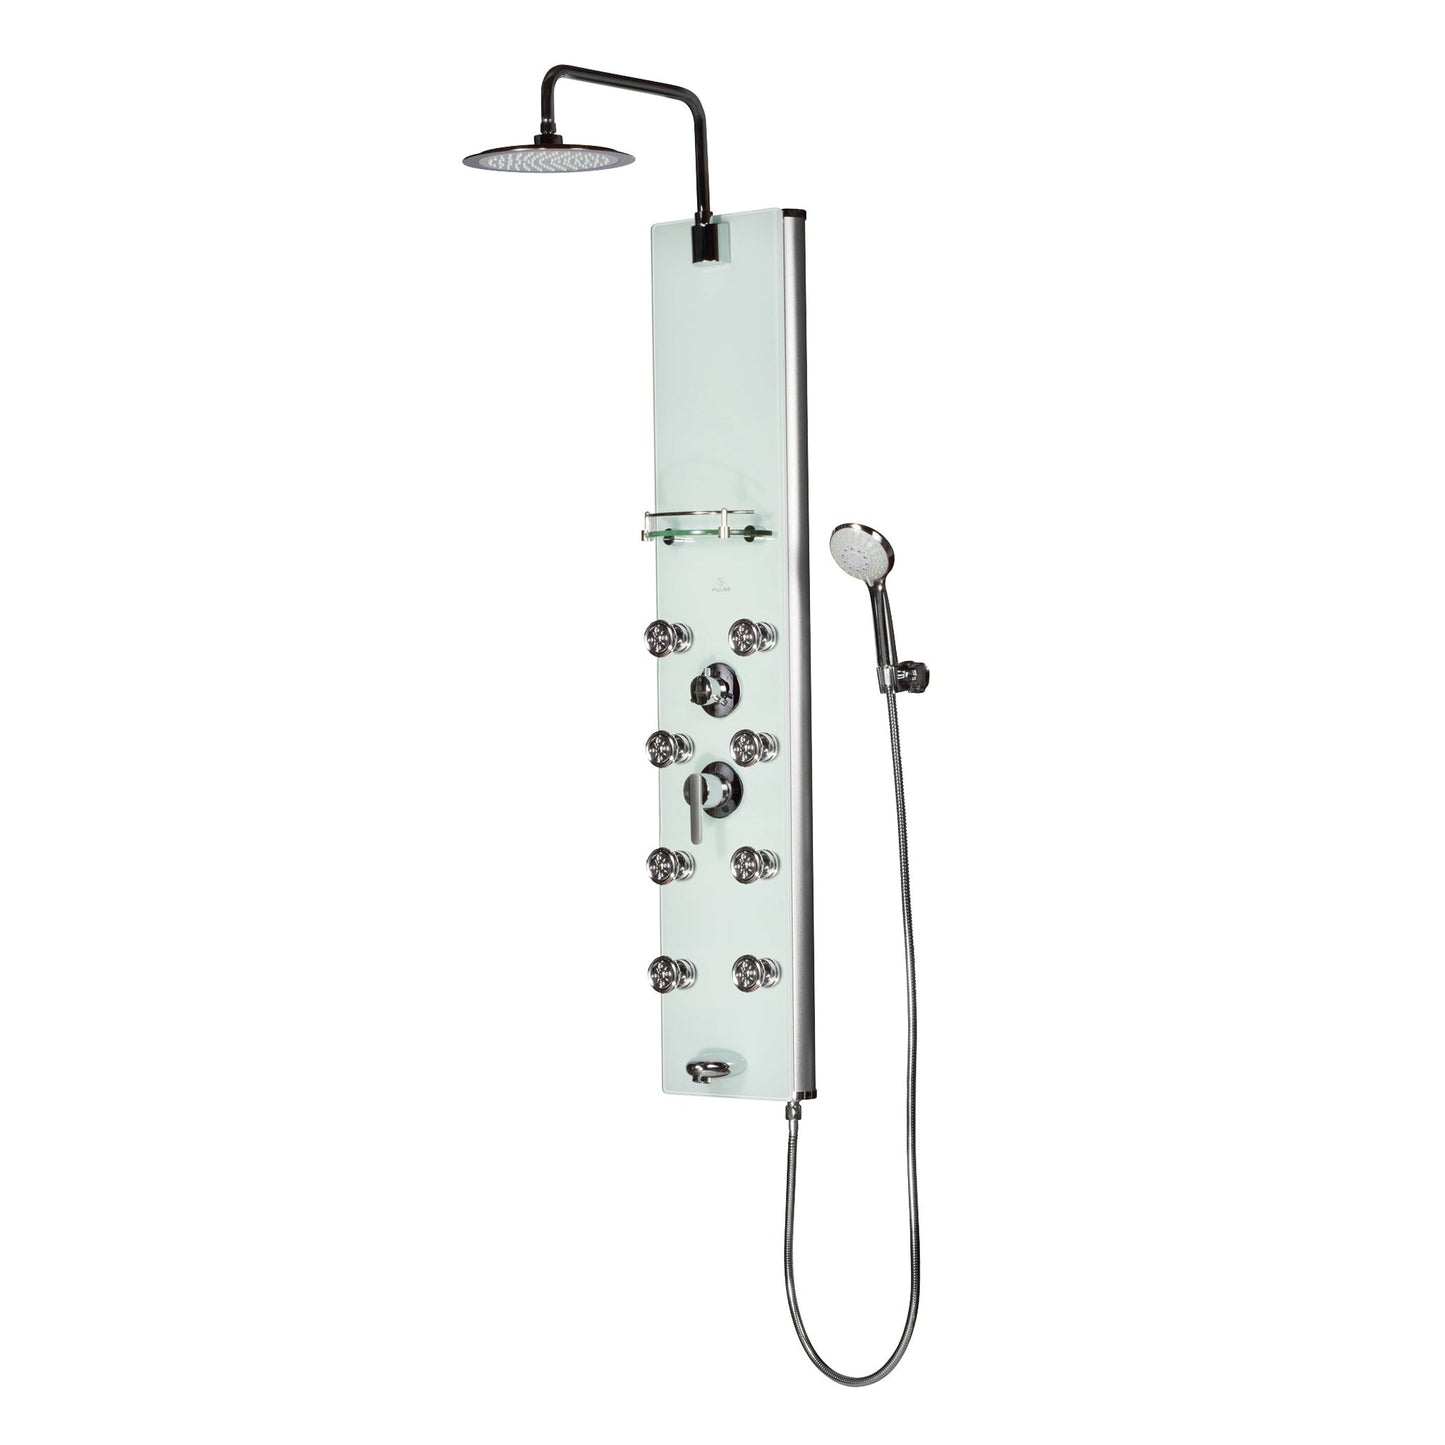 PULSE ShowerSpas Lahaina 58" Rain Shower Panel in Seafoam Colored Tempered Glass Finish With 8-Power Spray Body Jet and Multi Function Hand Shower